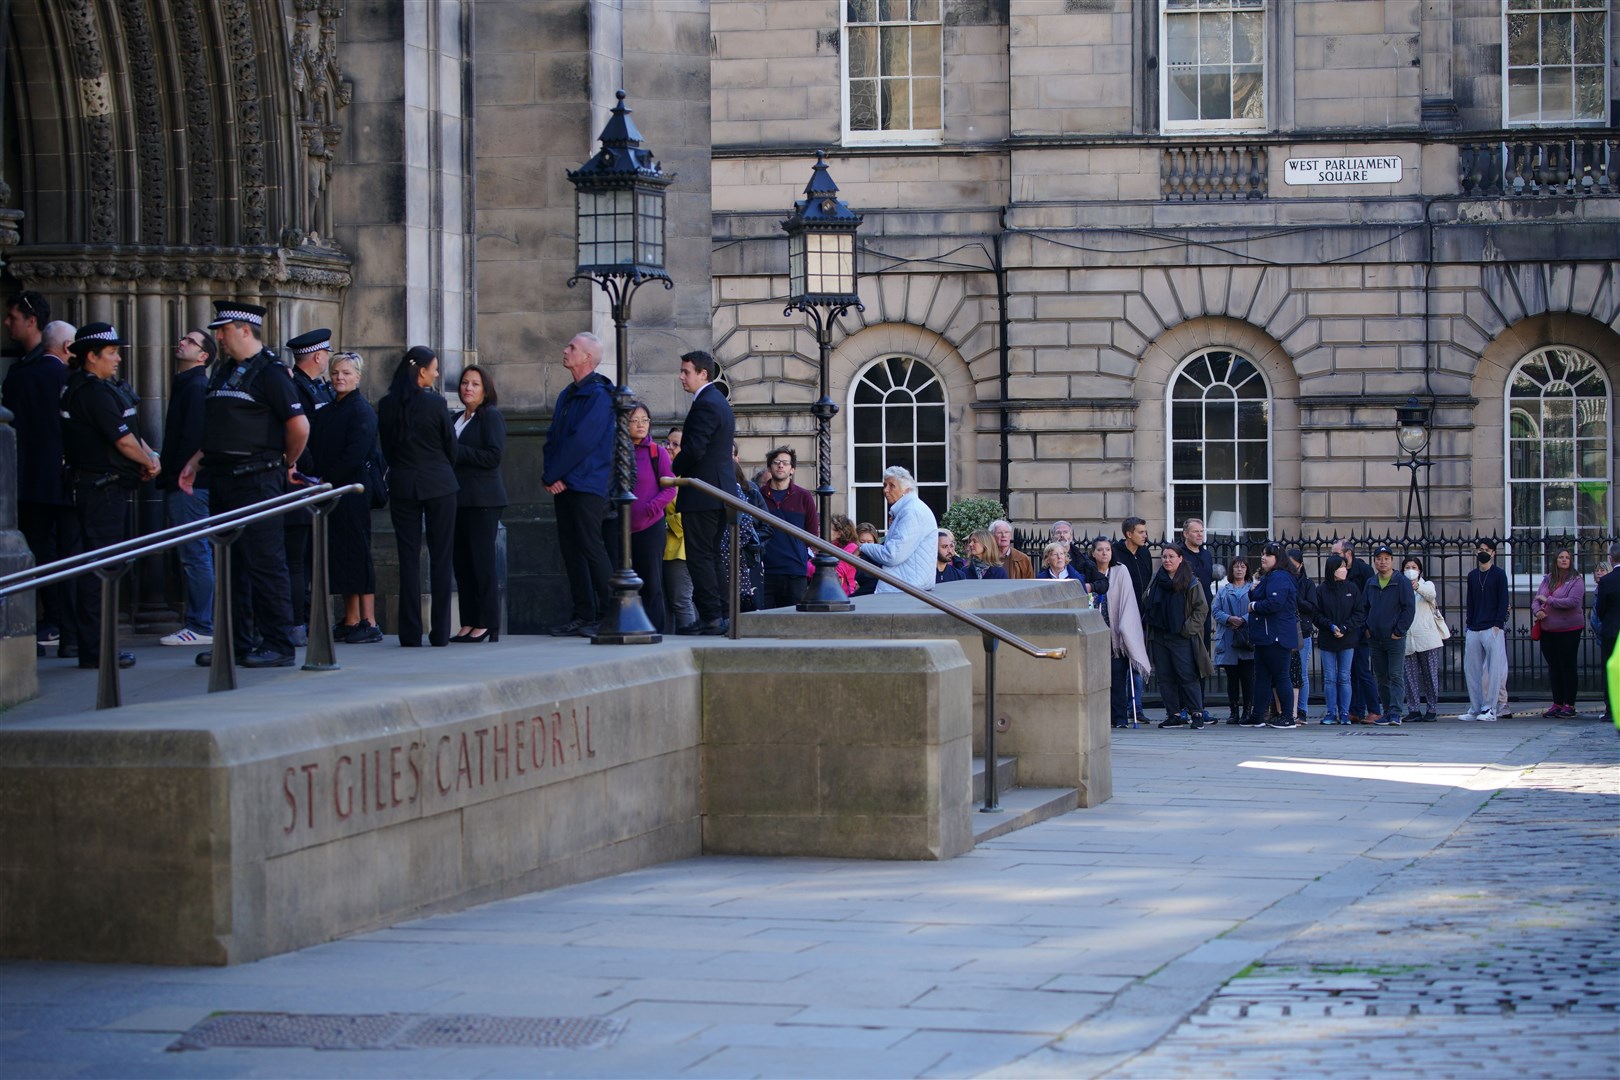 Members of the public queueing to pay their respects to the Queen at St Giles’s Cathedral (Peter Byrne/PA)